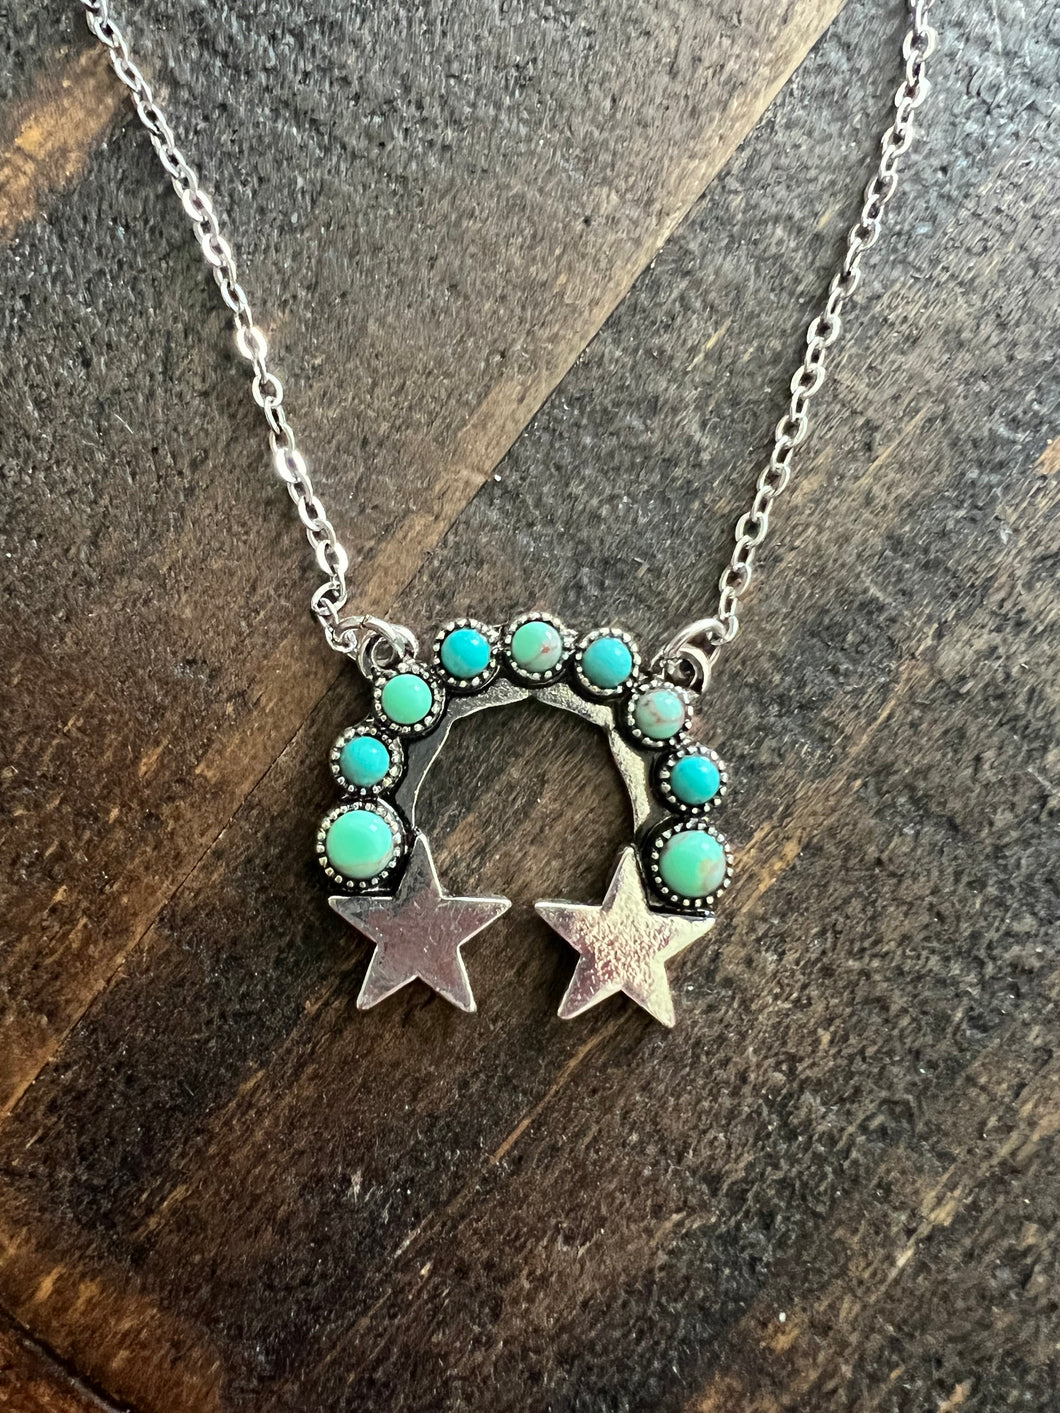 Dainty turquoise star necklace